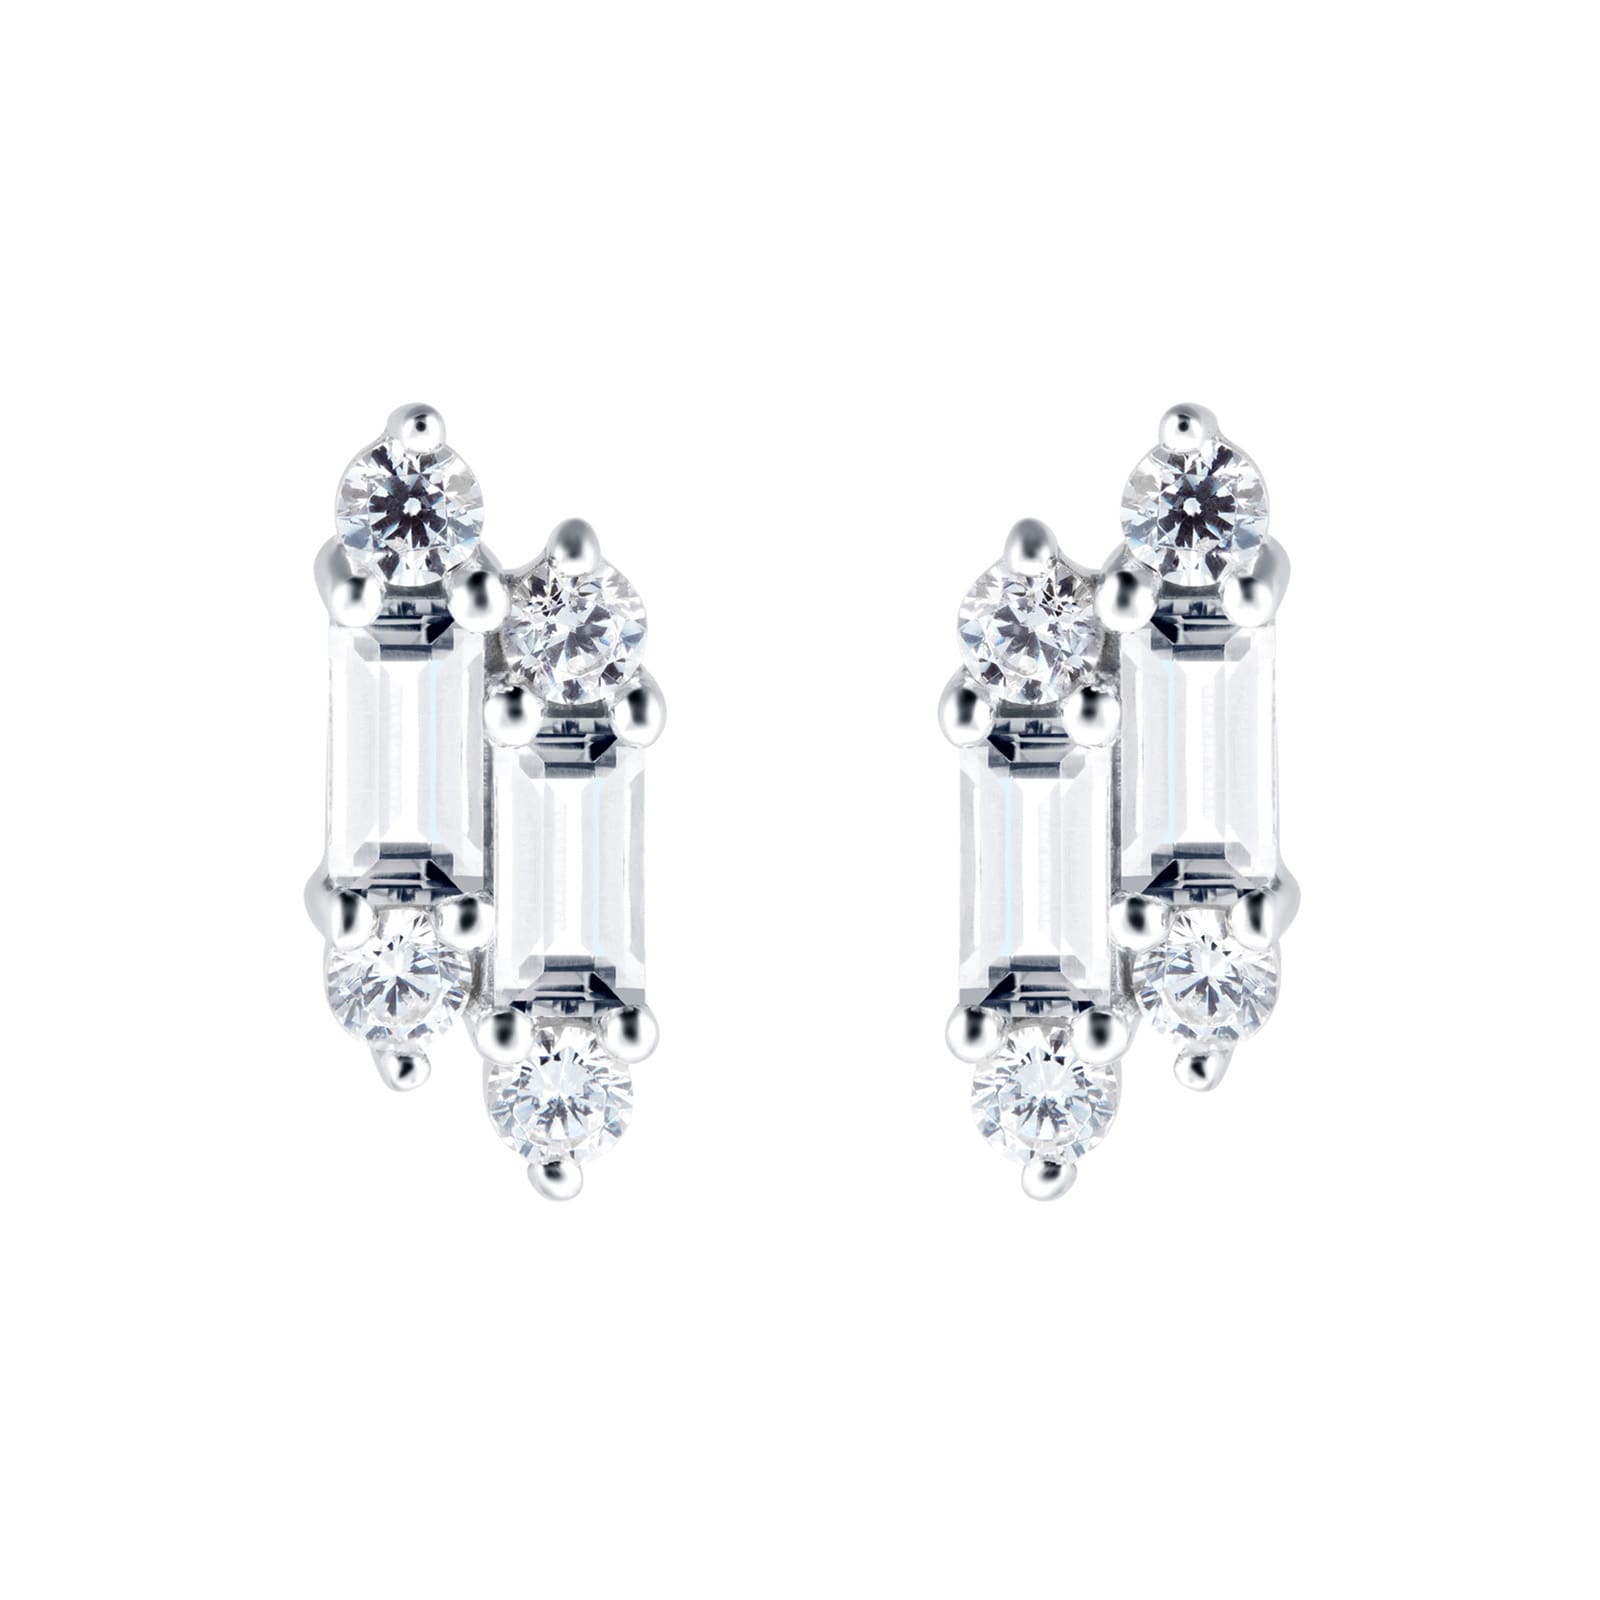 9ct White Gold Mixed Cubic Zirconia Stud Earrings